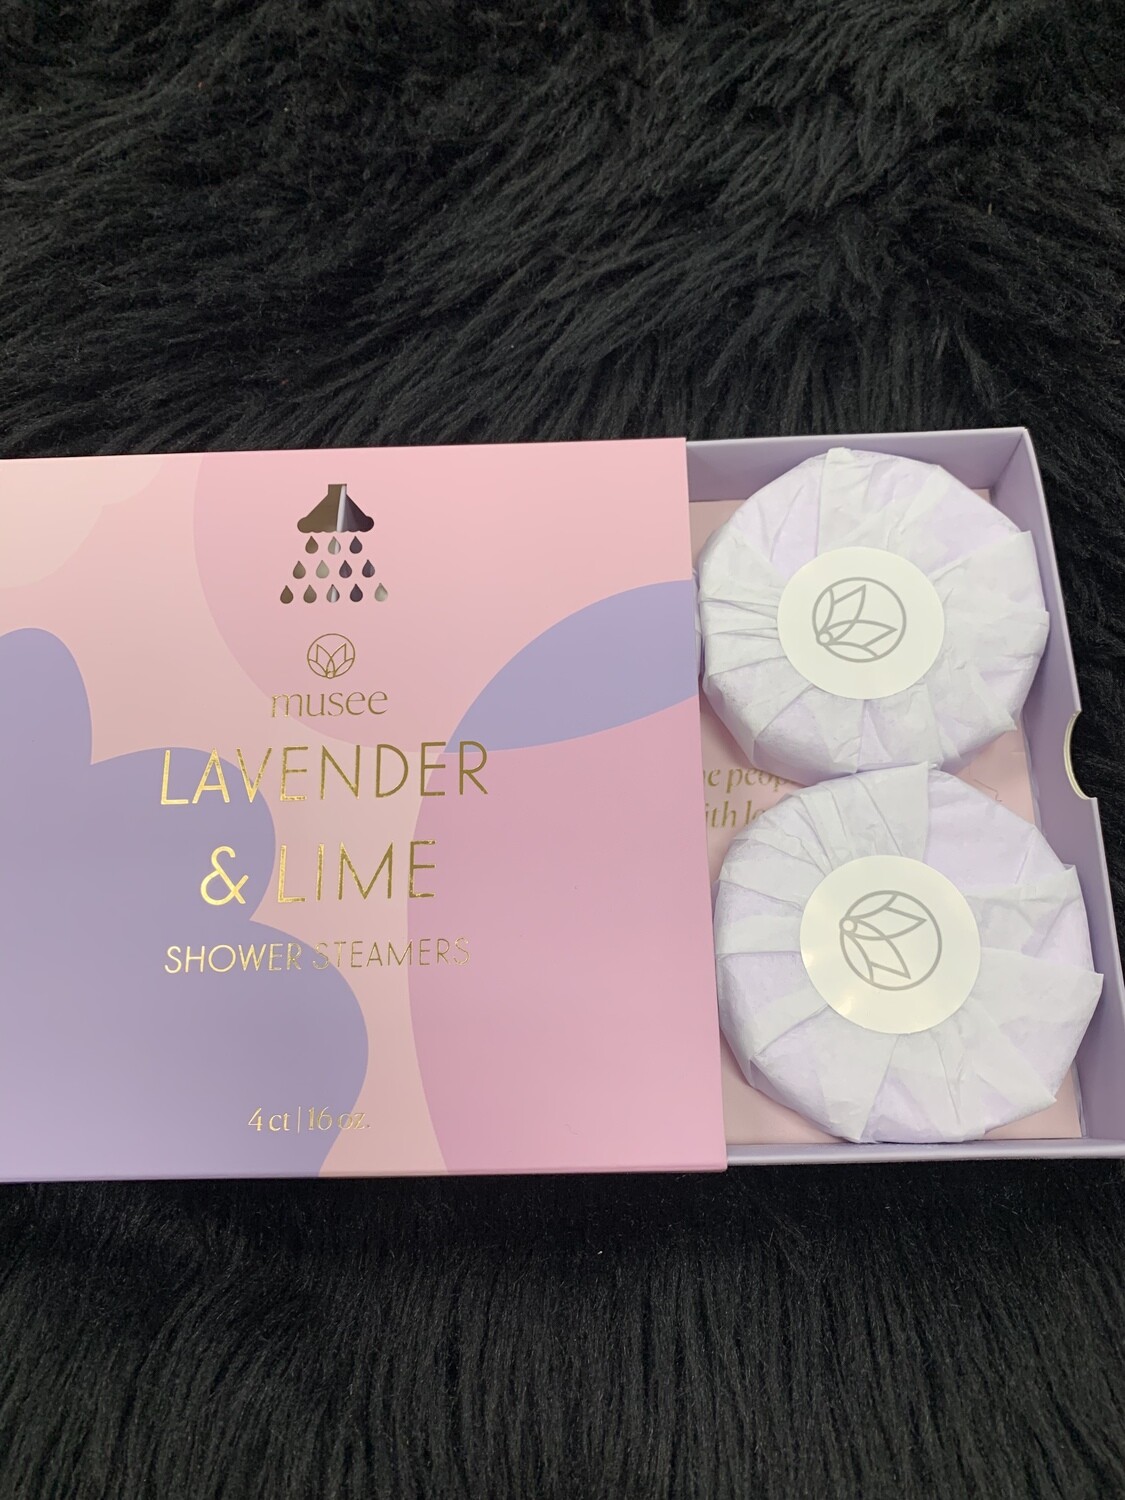 Musee Lavender and Lime Shower Steamers (21b)